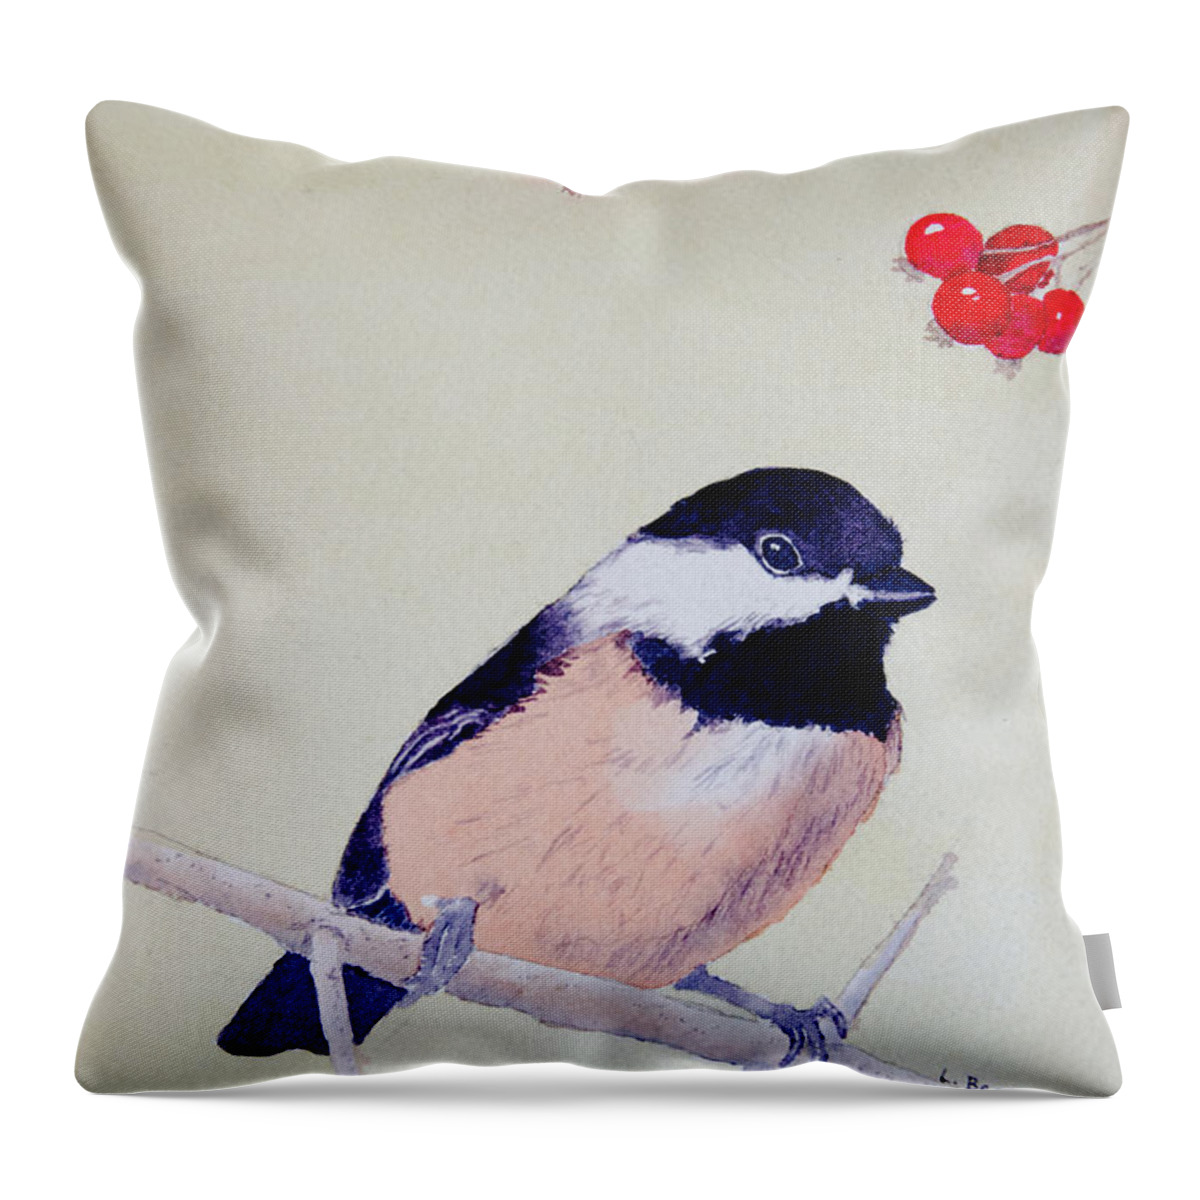 Chickadee Throw Pillow featuring the painting Chickadee by Laurel Best